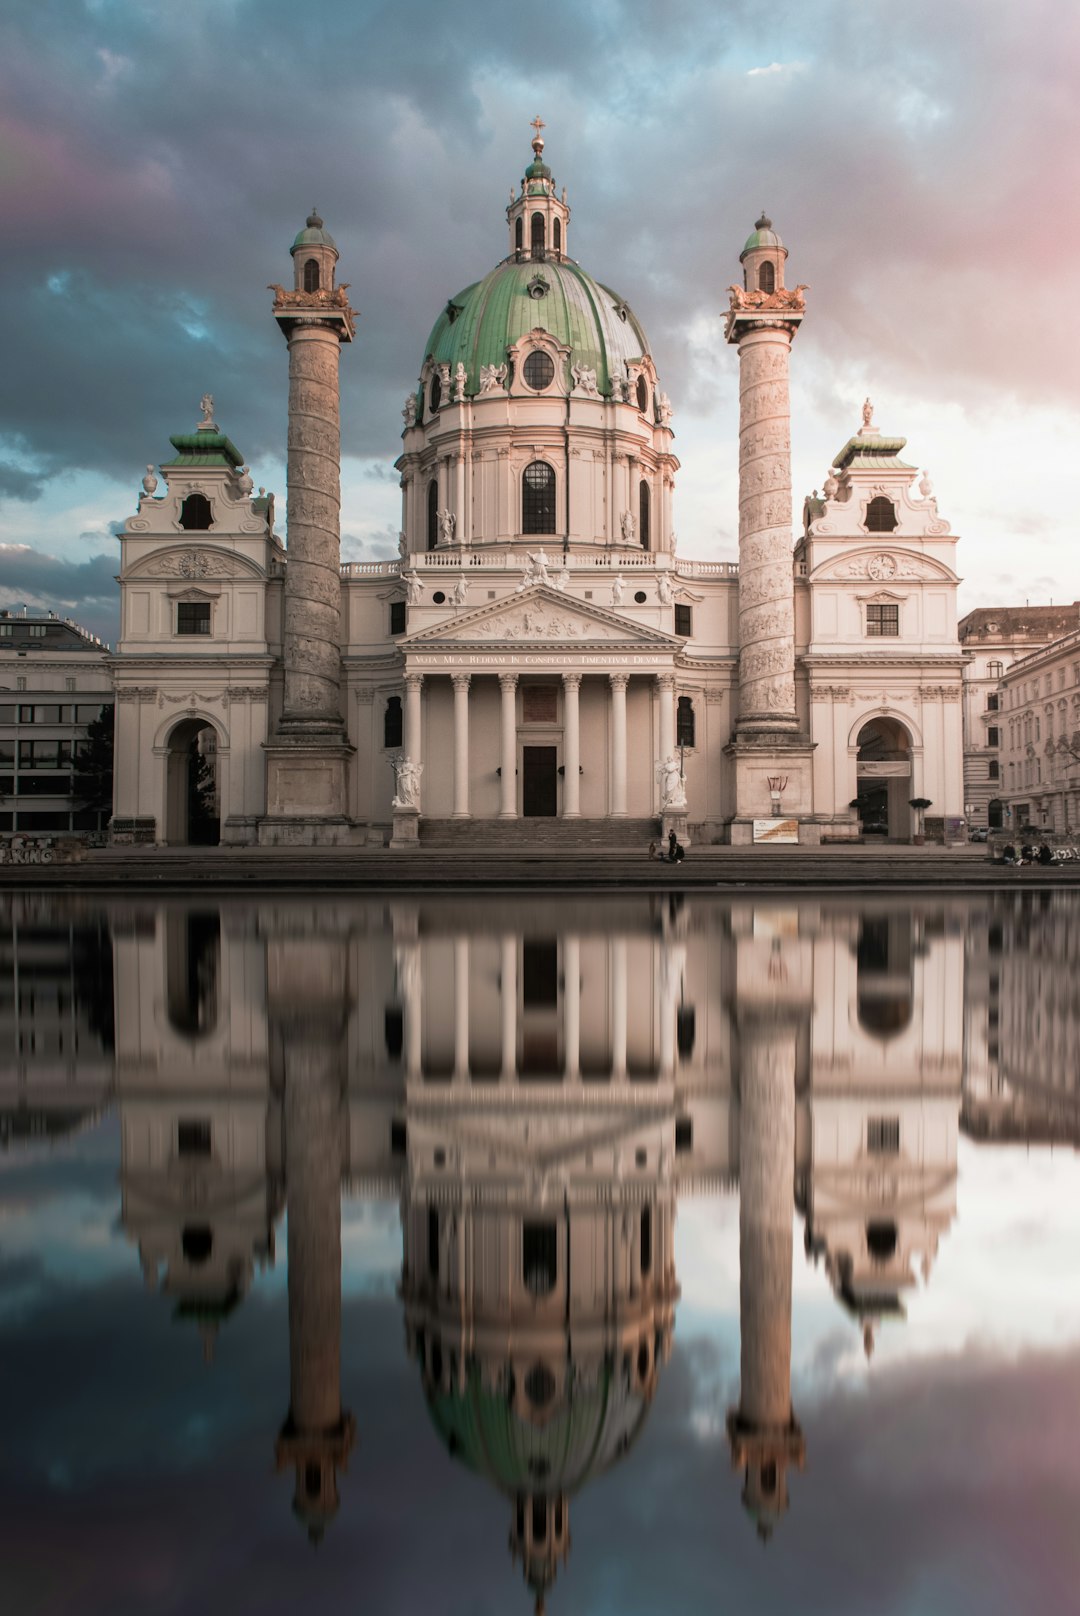 Travel Tips and Stories of Karlskirche in Austria